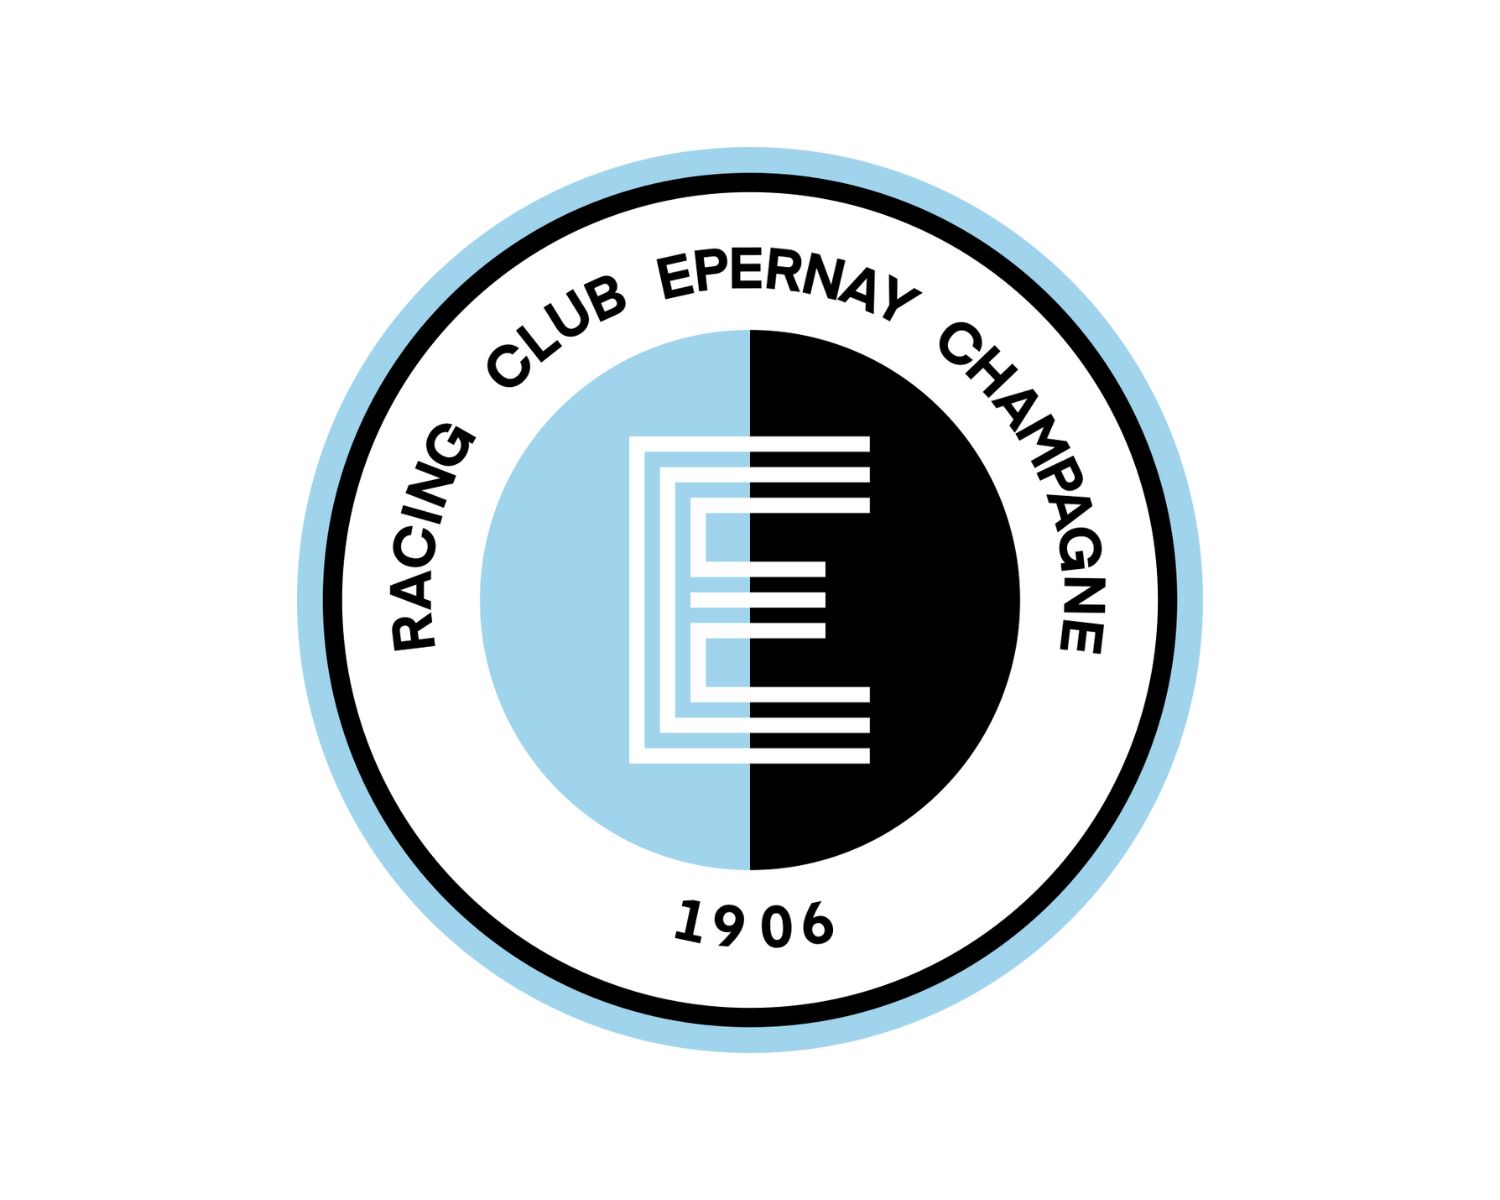 rc-epernay-champagne-20-football-club-facts